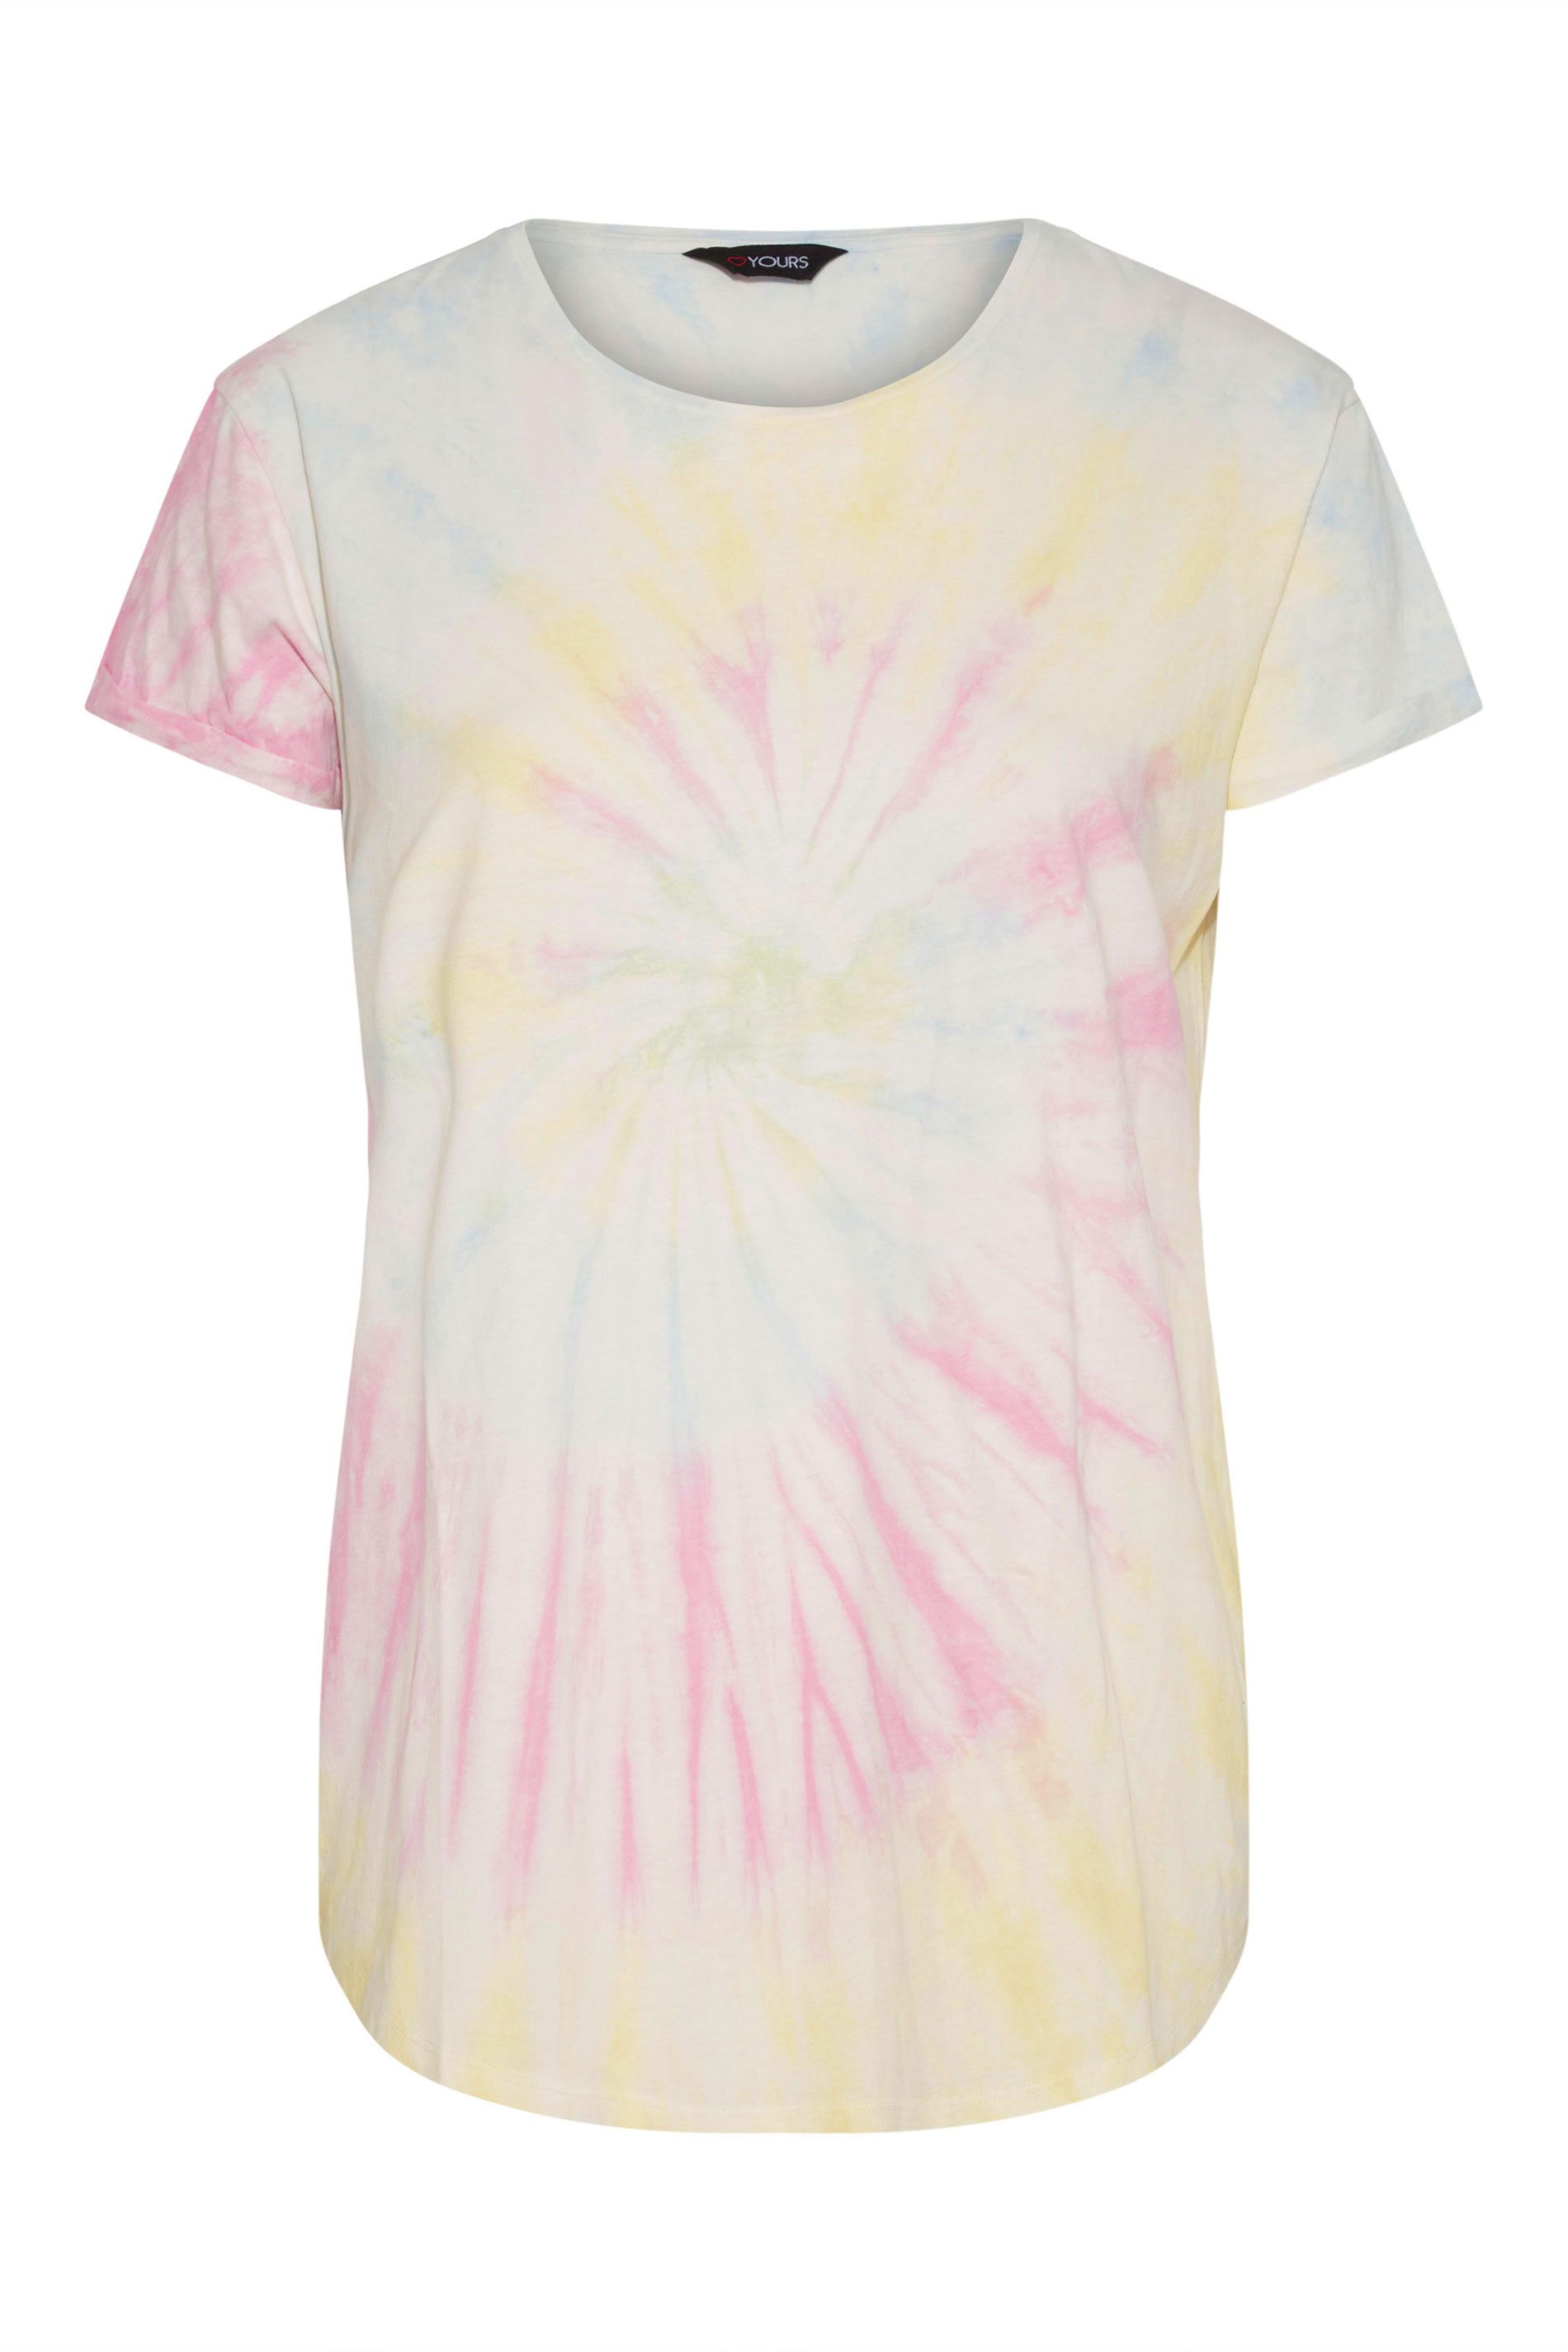 Grande taille  Tops Grande taille  T-Shirts | YOURS FOR GOOD - T-Shirt Blanc Tie & Dye - GE81265